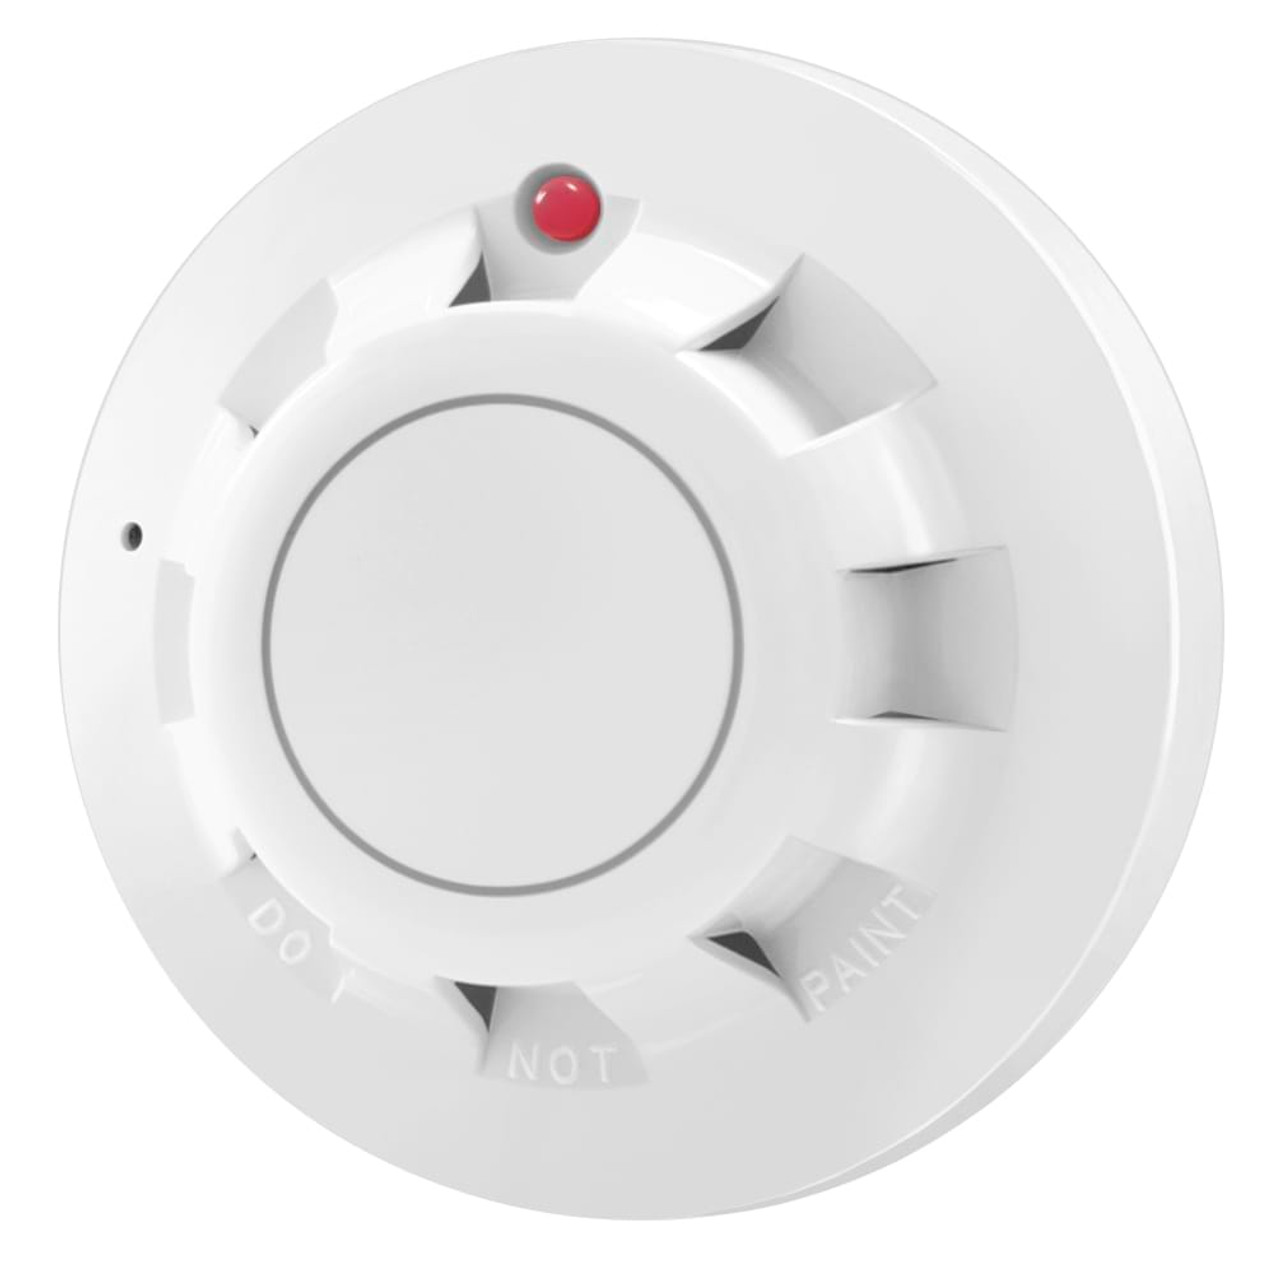 SSDC65-OE Smoke Detector For Ceiling Mounting P12273